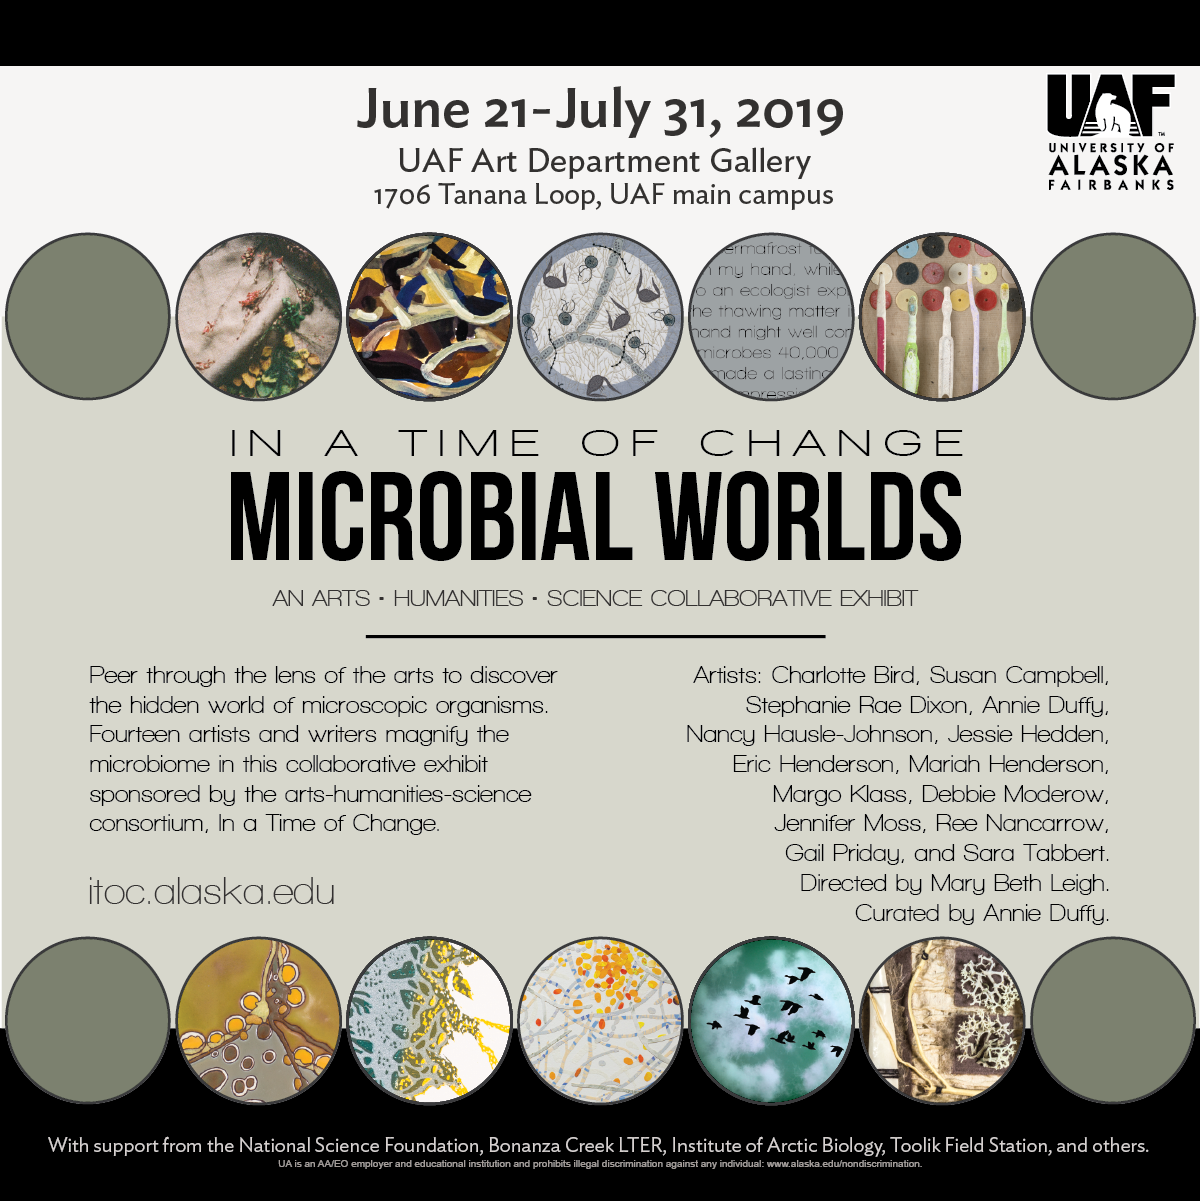 Microbial Worlds event flyer